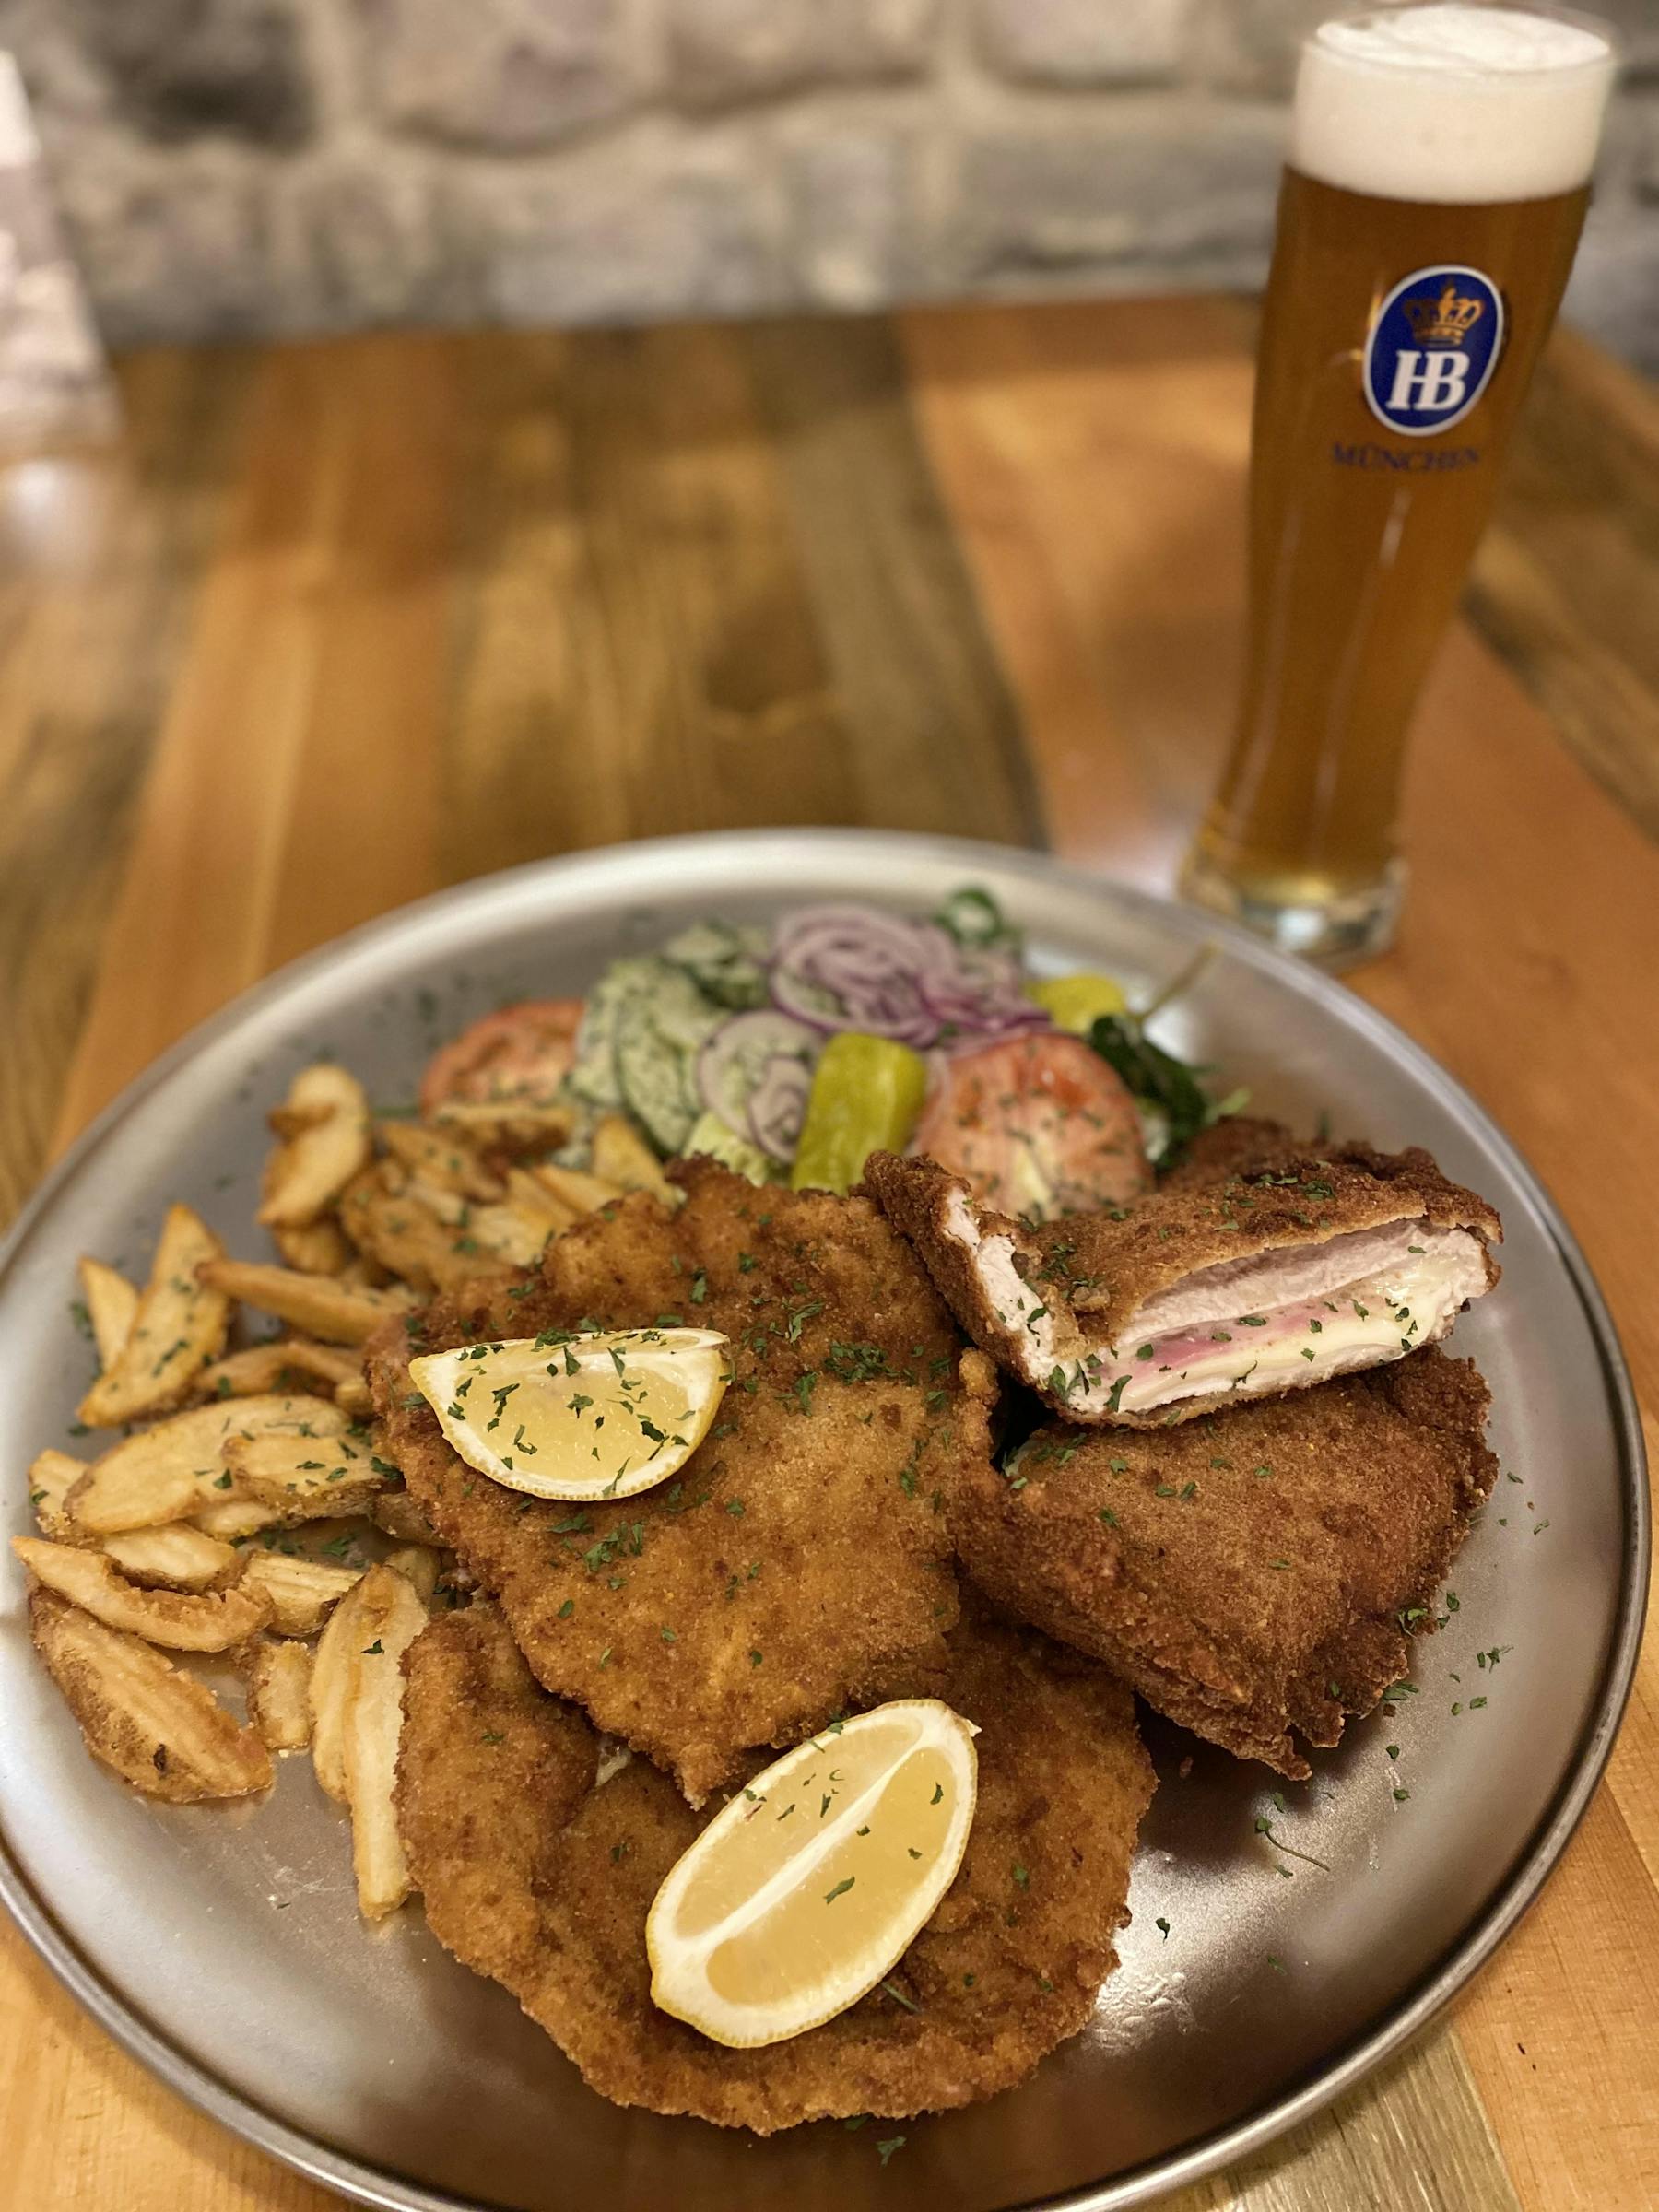 a plate of food and a cup of beer